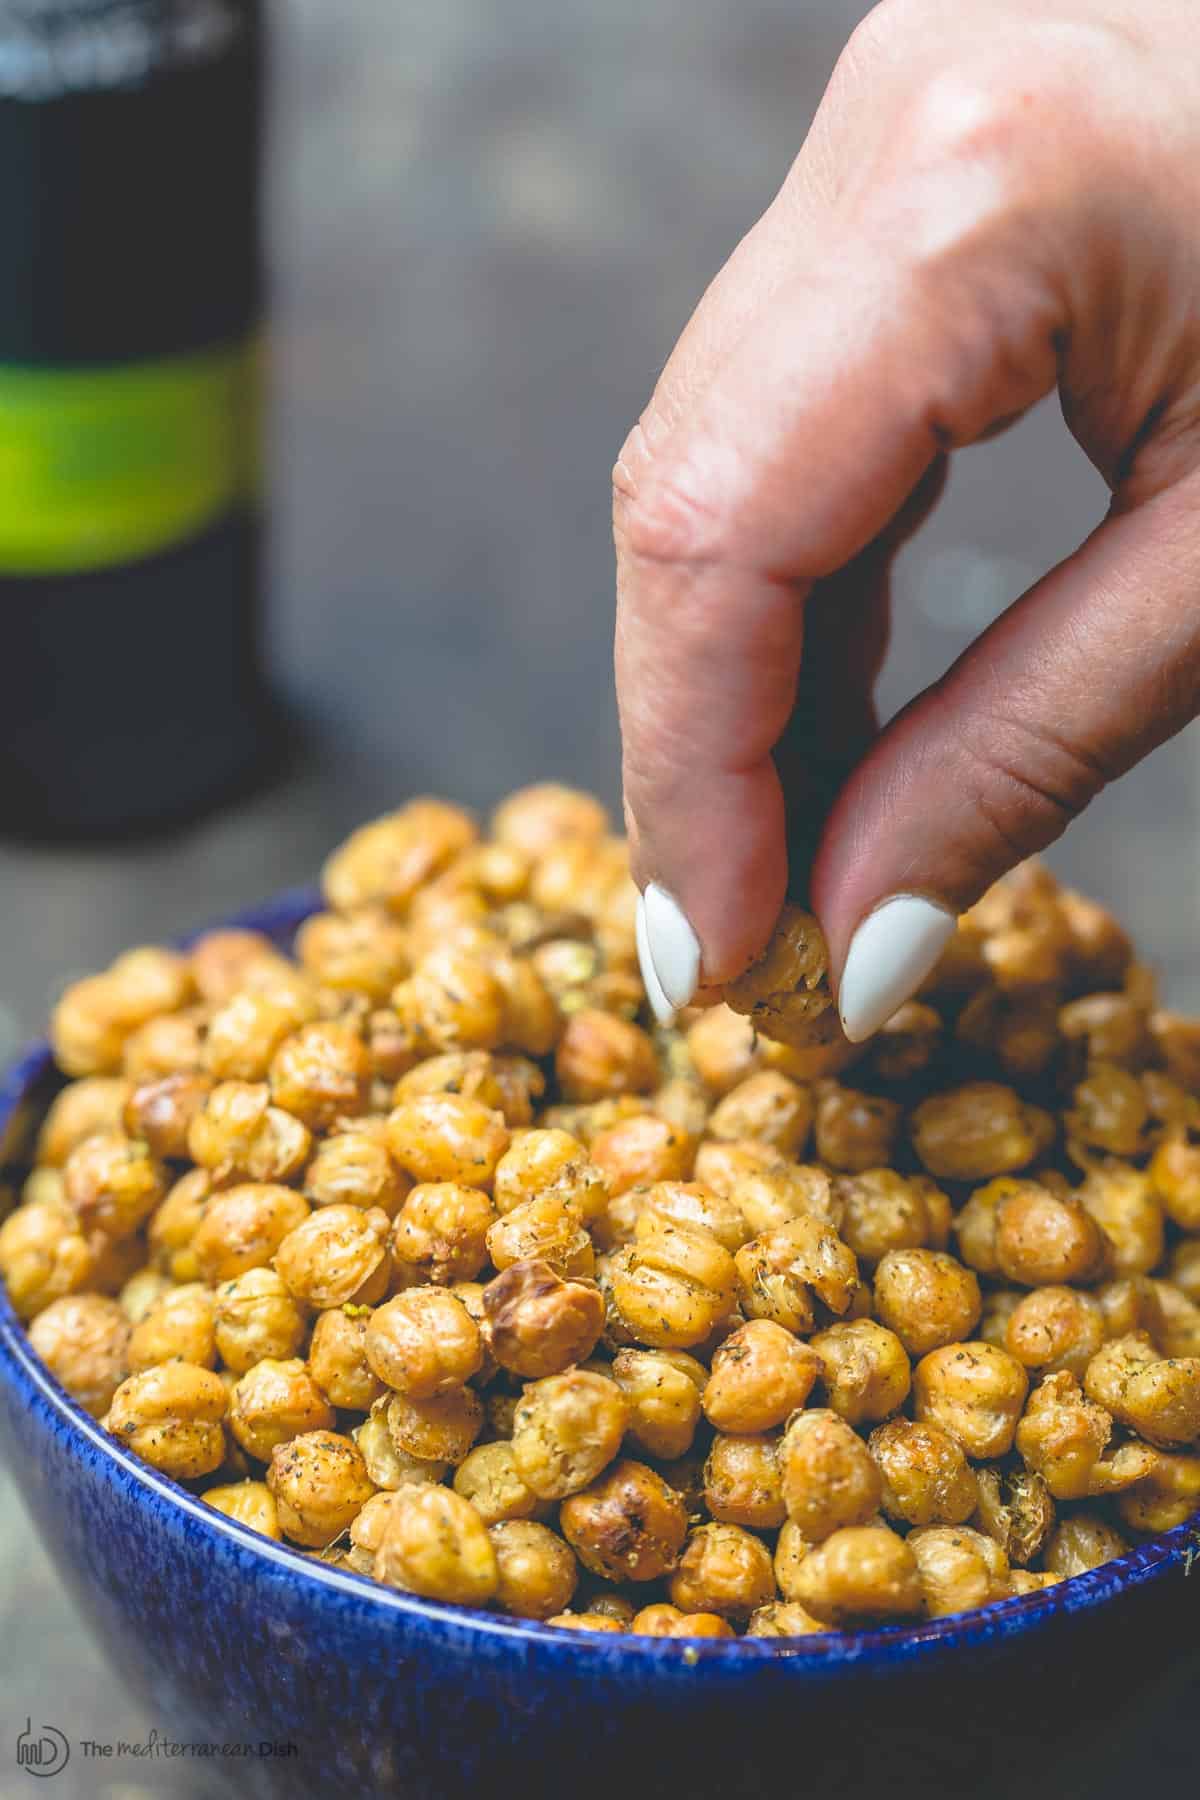 Hand picking roasted chickpeas from bowl